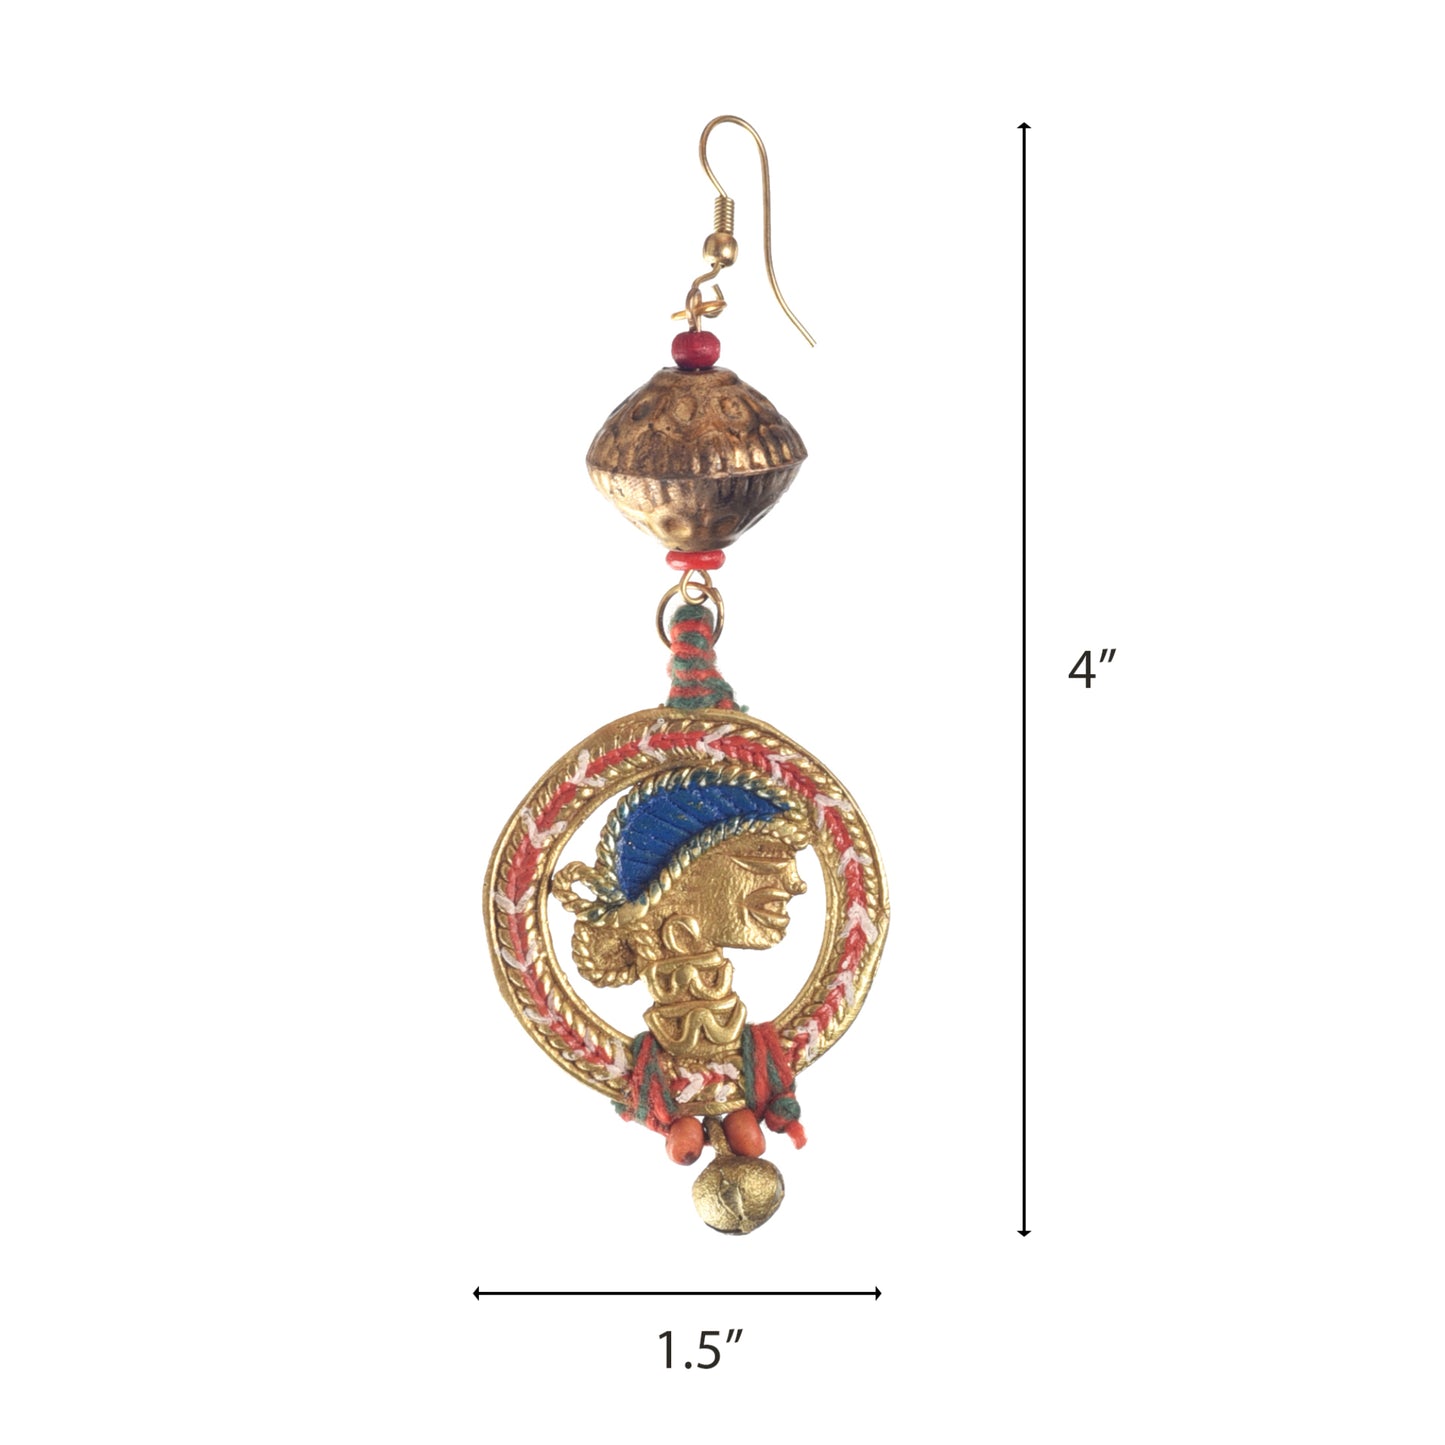 The Red Queen Handcrafted Earrings